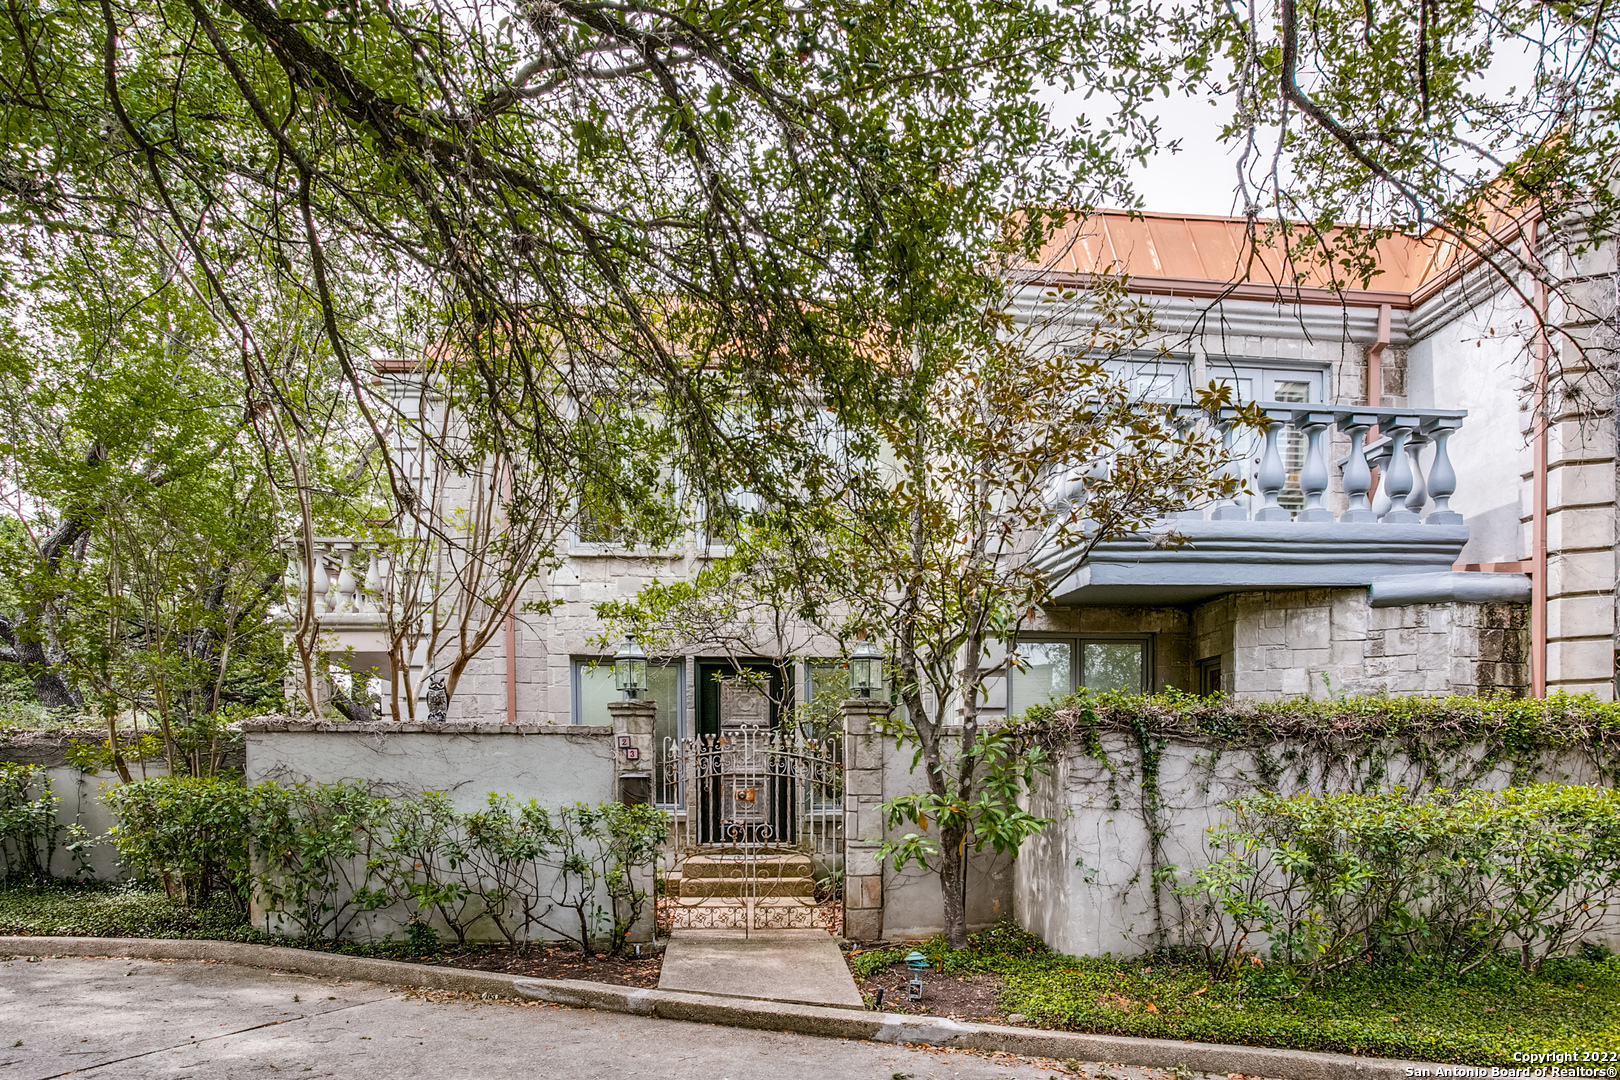 Elegant 4 bedroom 3.5 bath townhouse in Alamo Heights. Beautiful hardwood floors, high ceilings, large formal. Downstairs master with pretty bath & dual closets, 3 additional bedrooms upstairs and large family room with nice built-ins. Expansive patio with water feature.